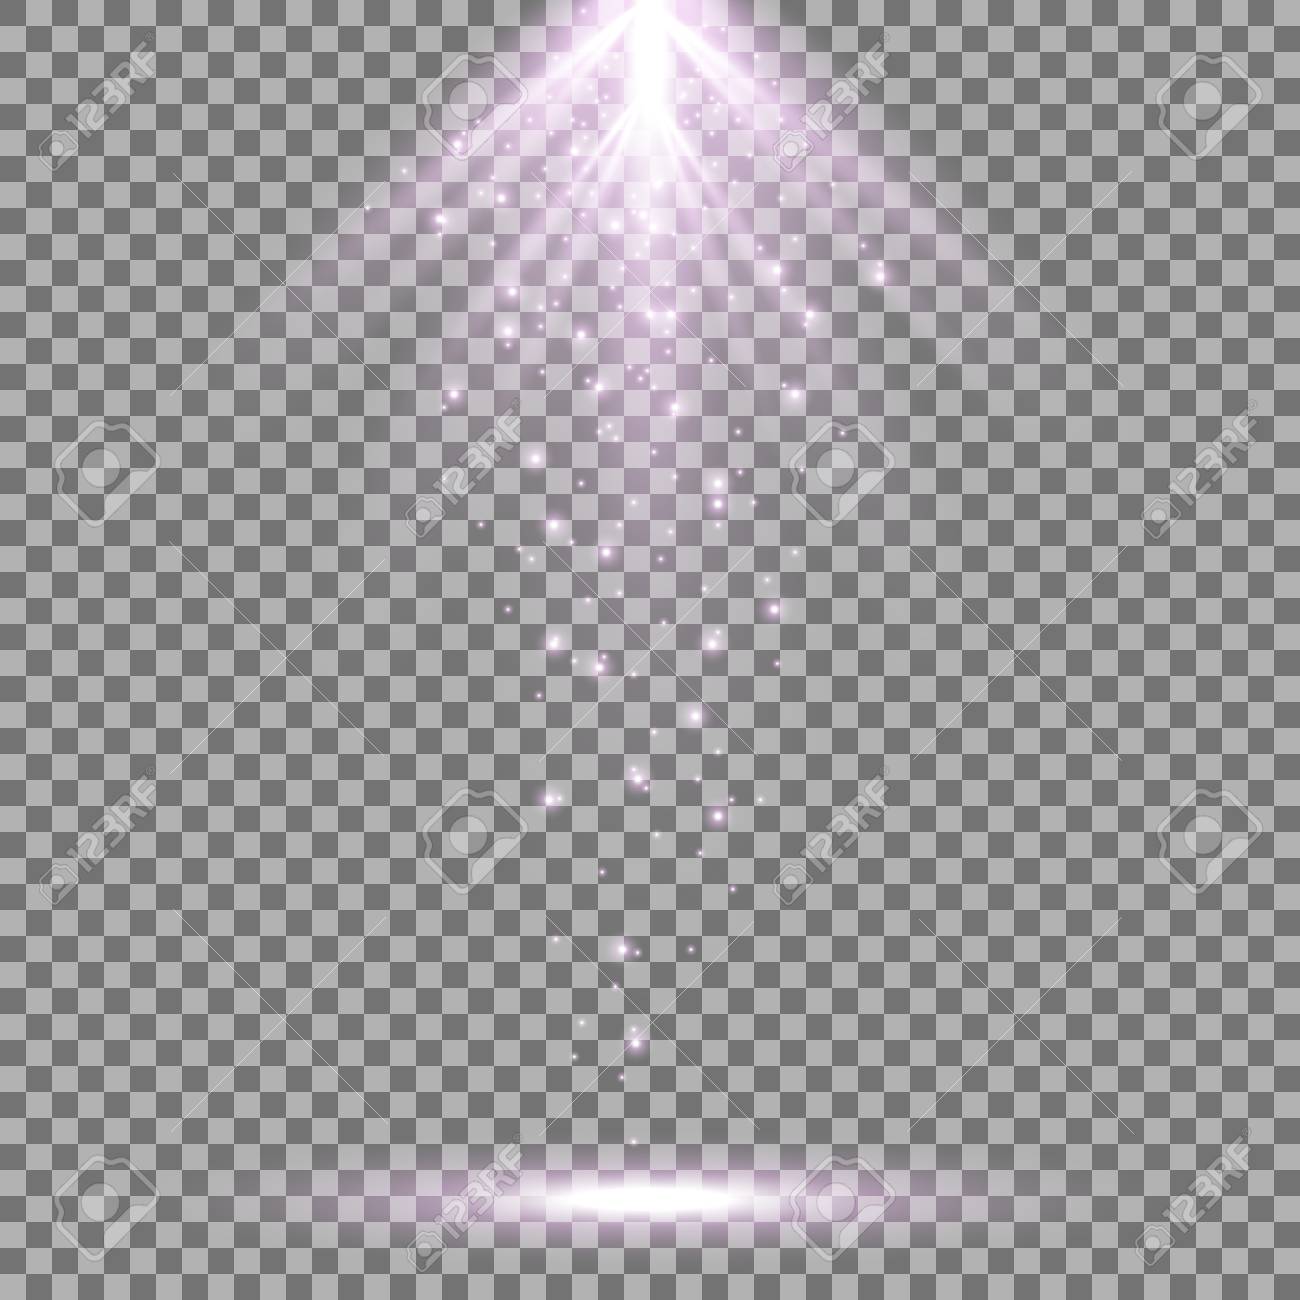 Bright Vector Rays From Above With Magic Sparks Light Effect